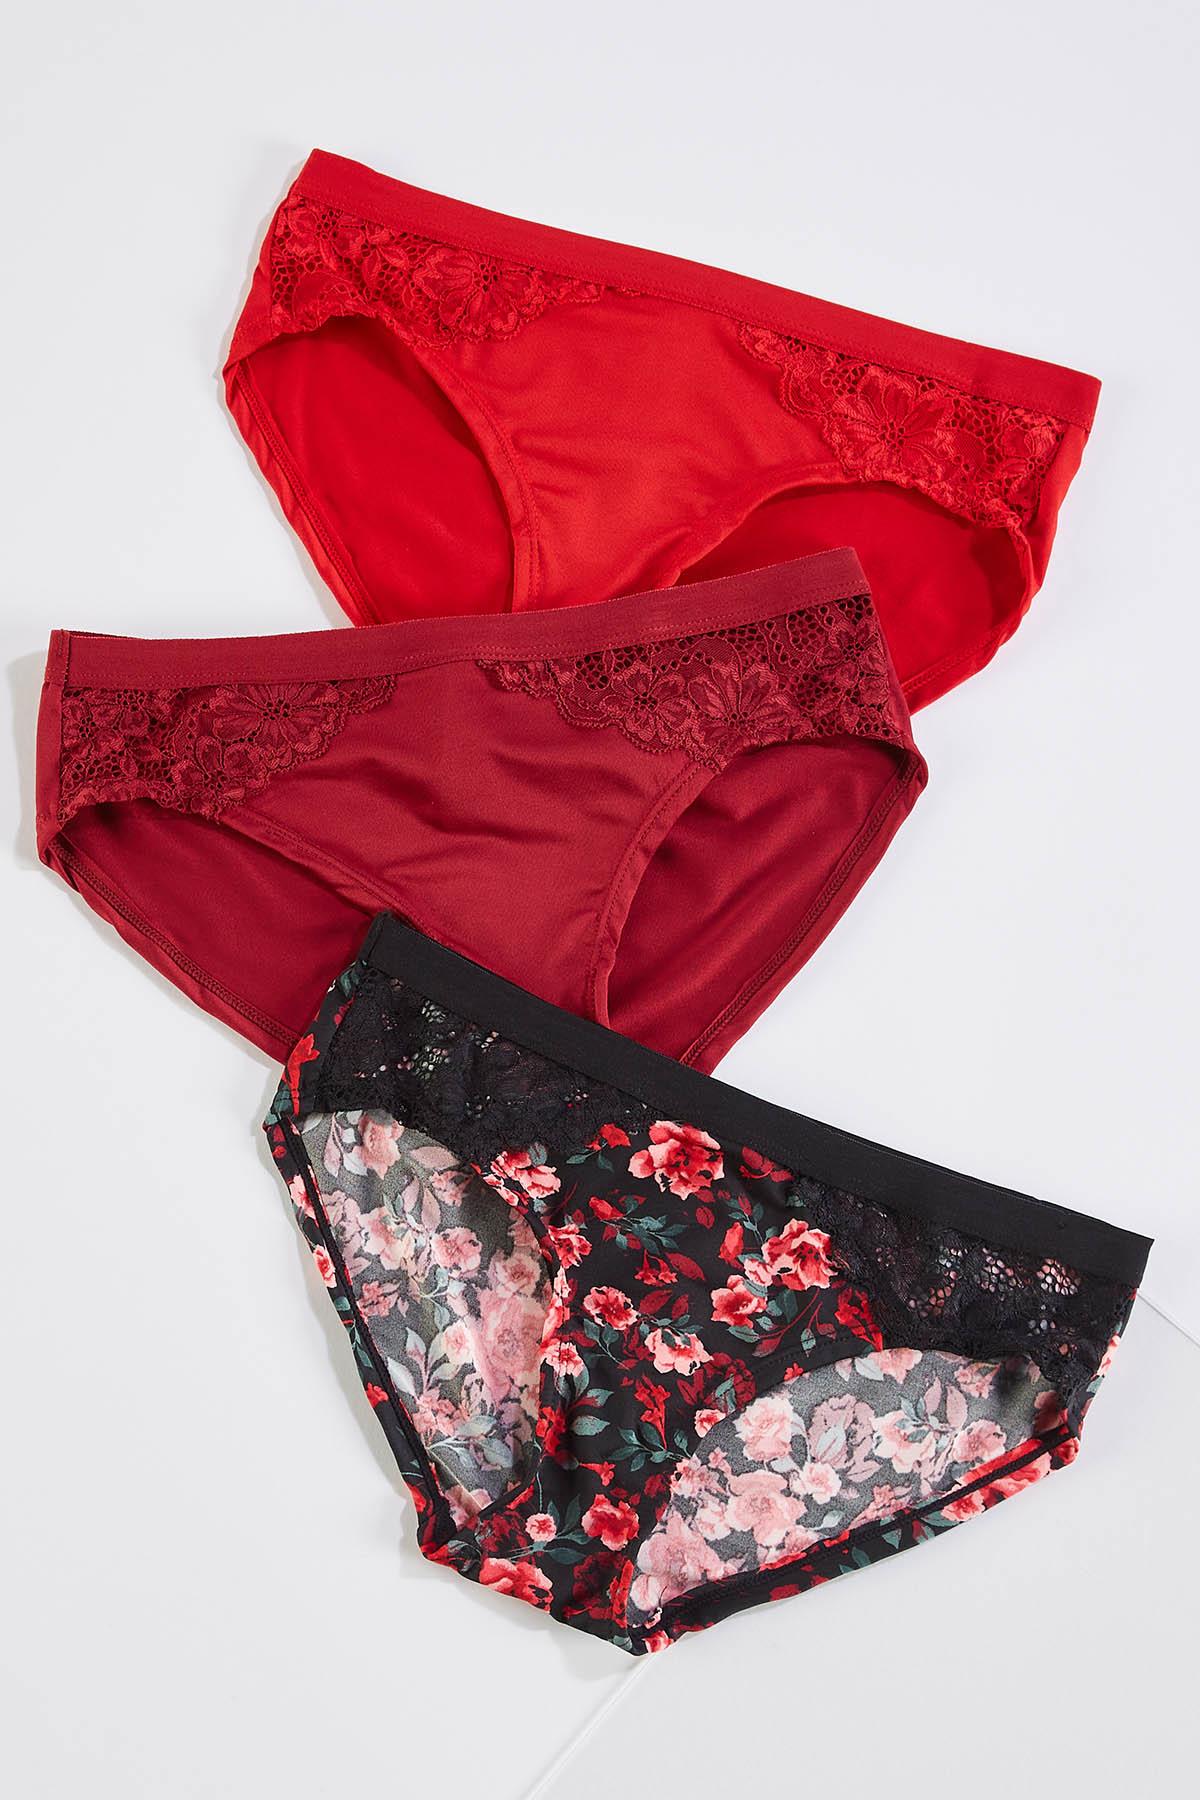 Cato Fashions  Cato Plus Size Red Floral Panty Set